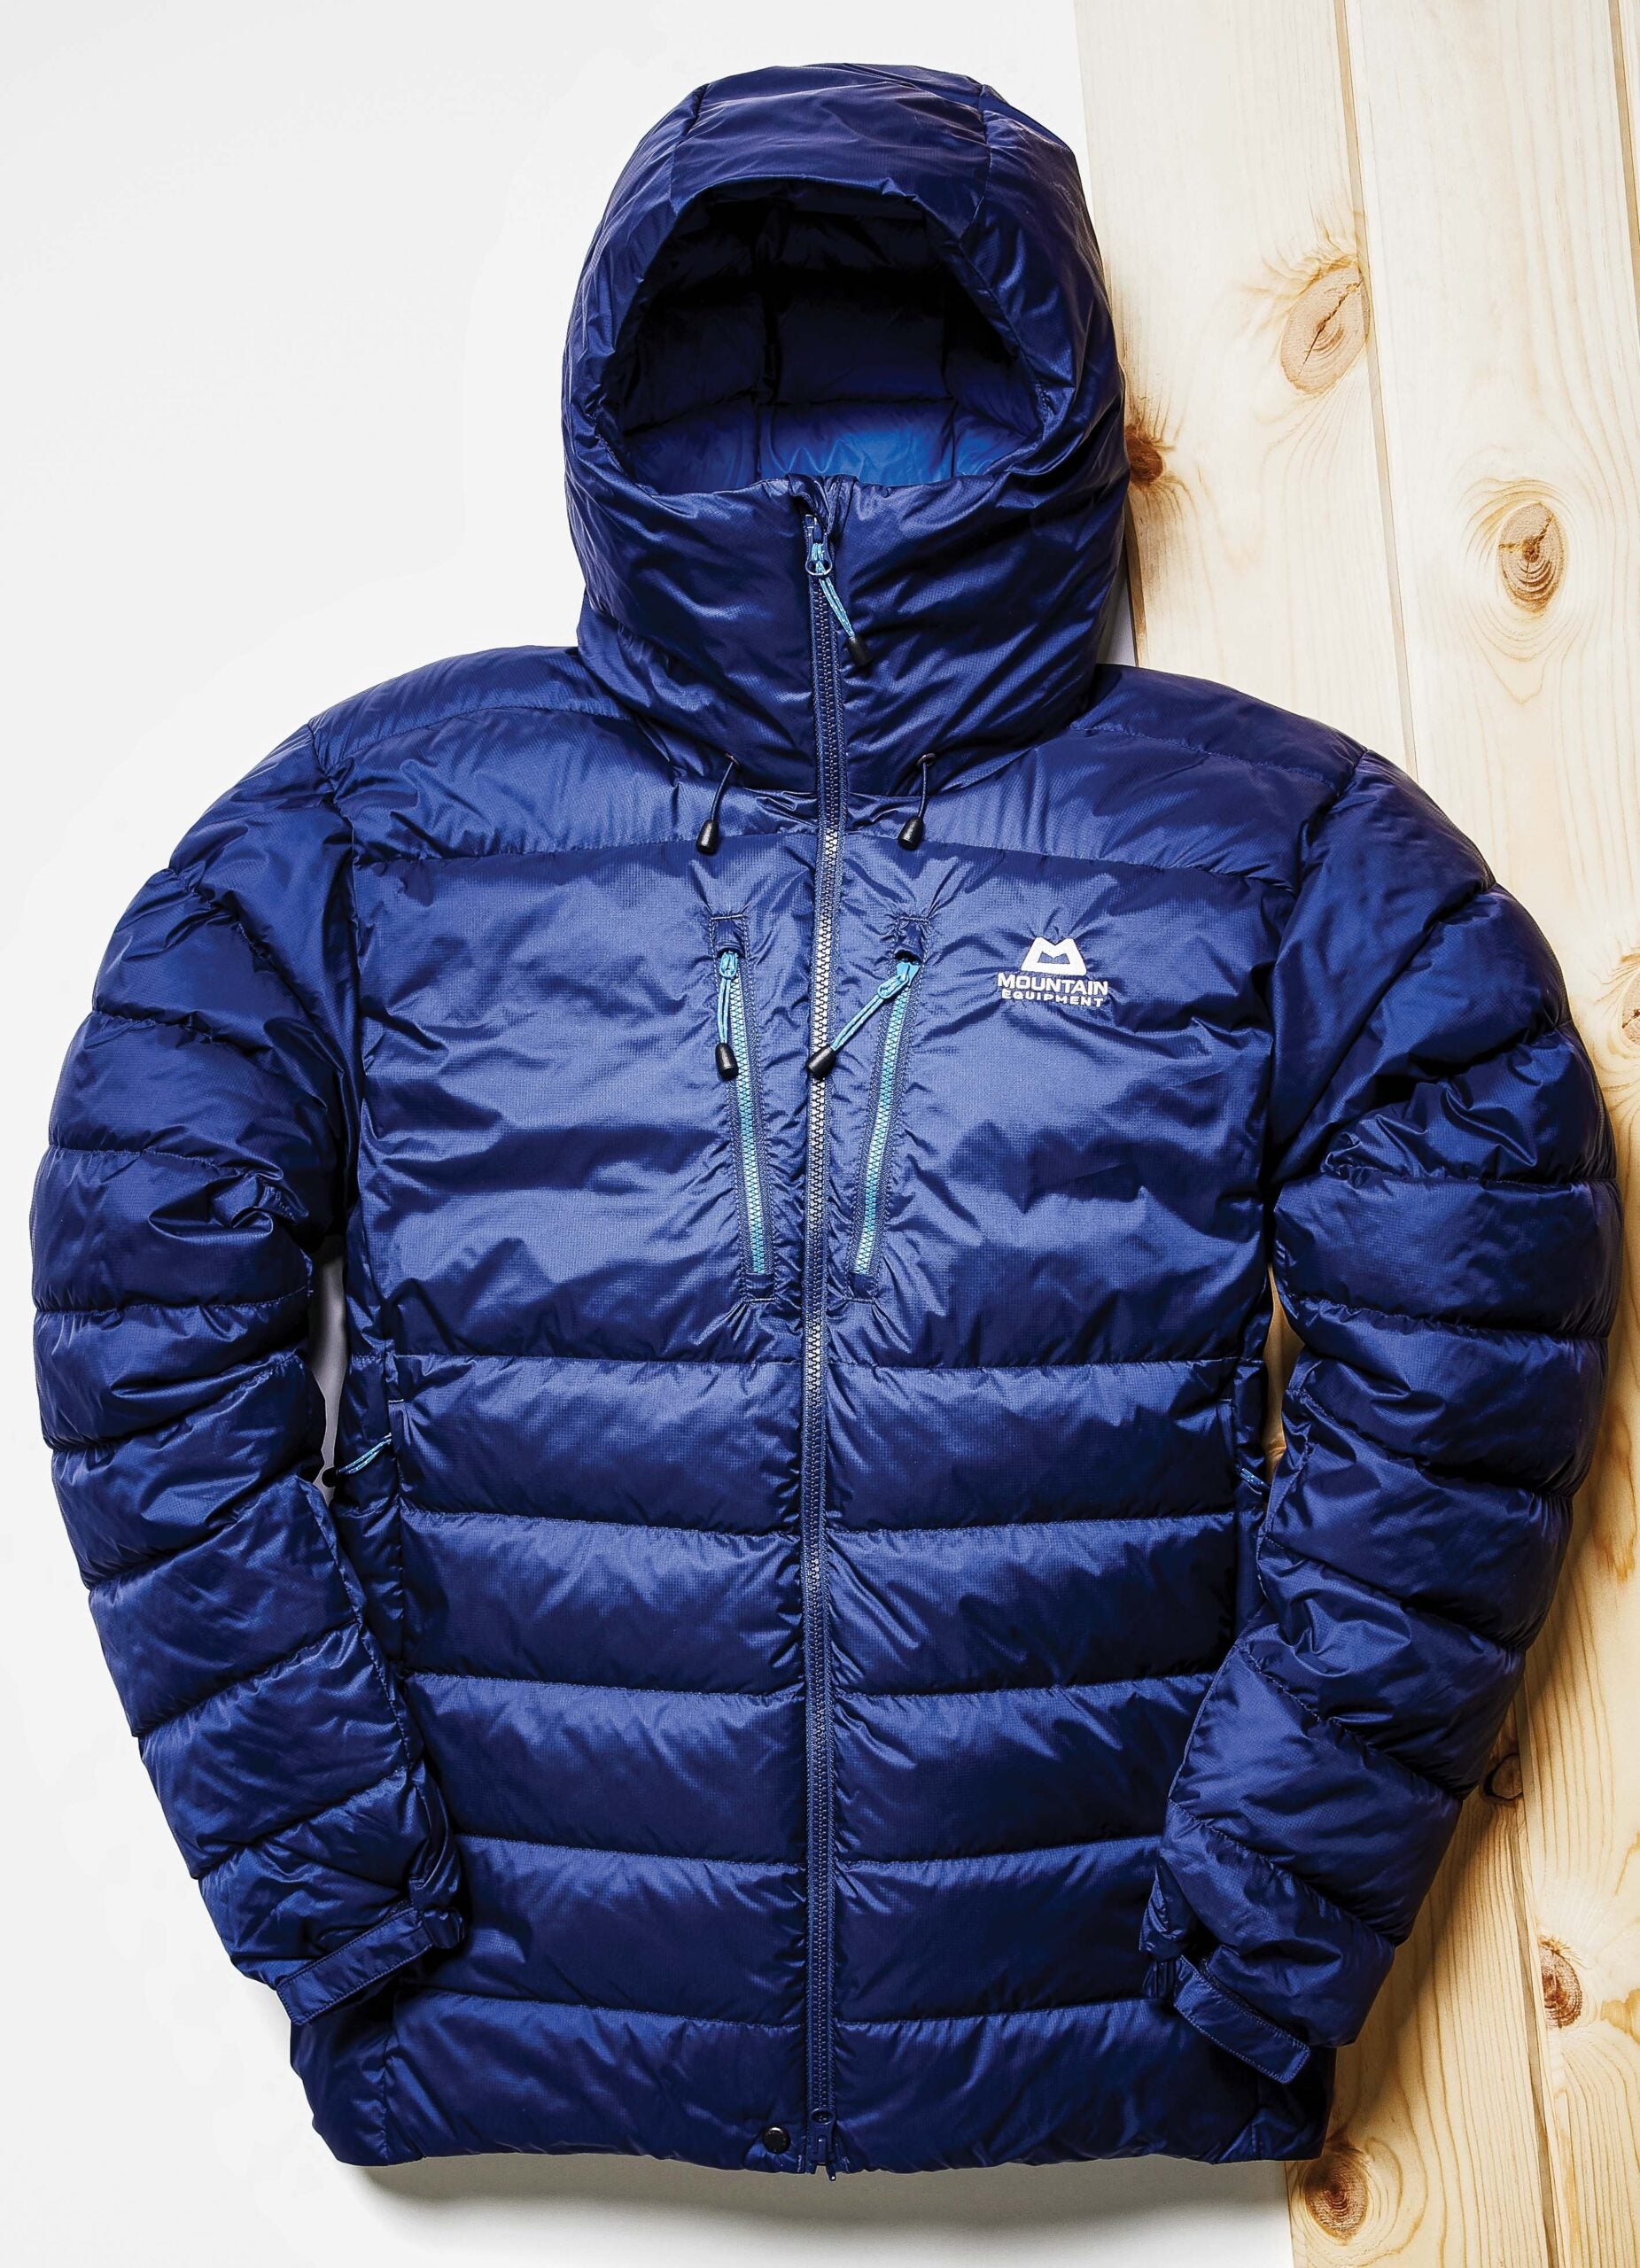 The 10 Best Winter Jackets for Hikers - The Complete Guide